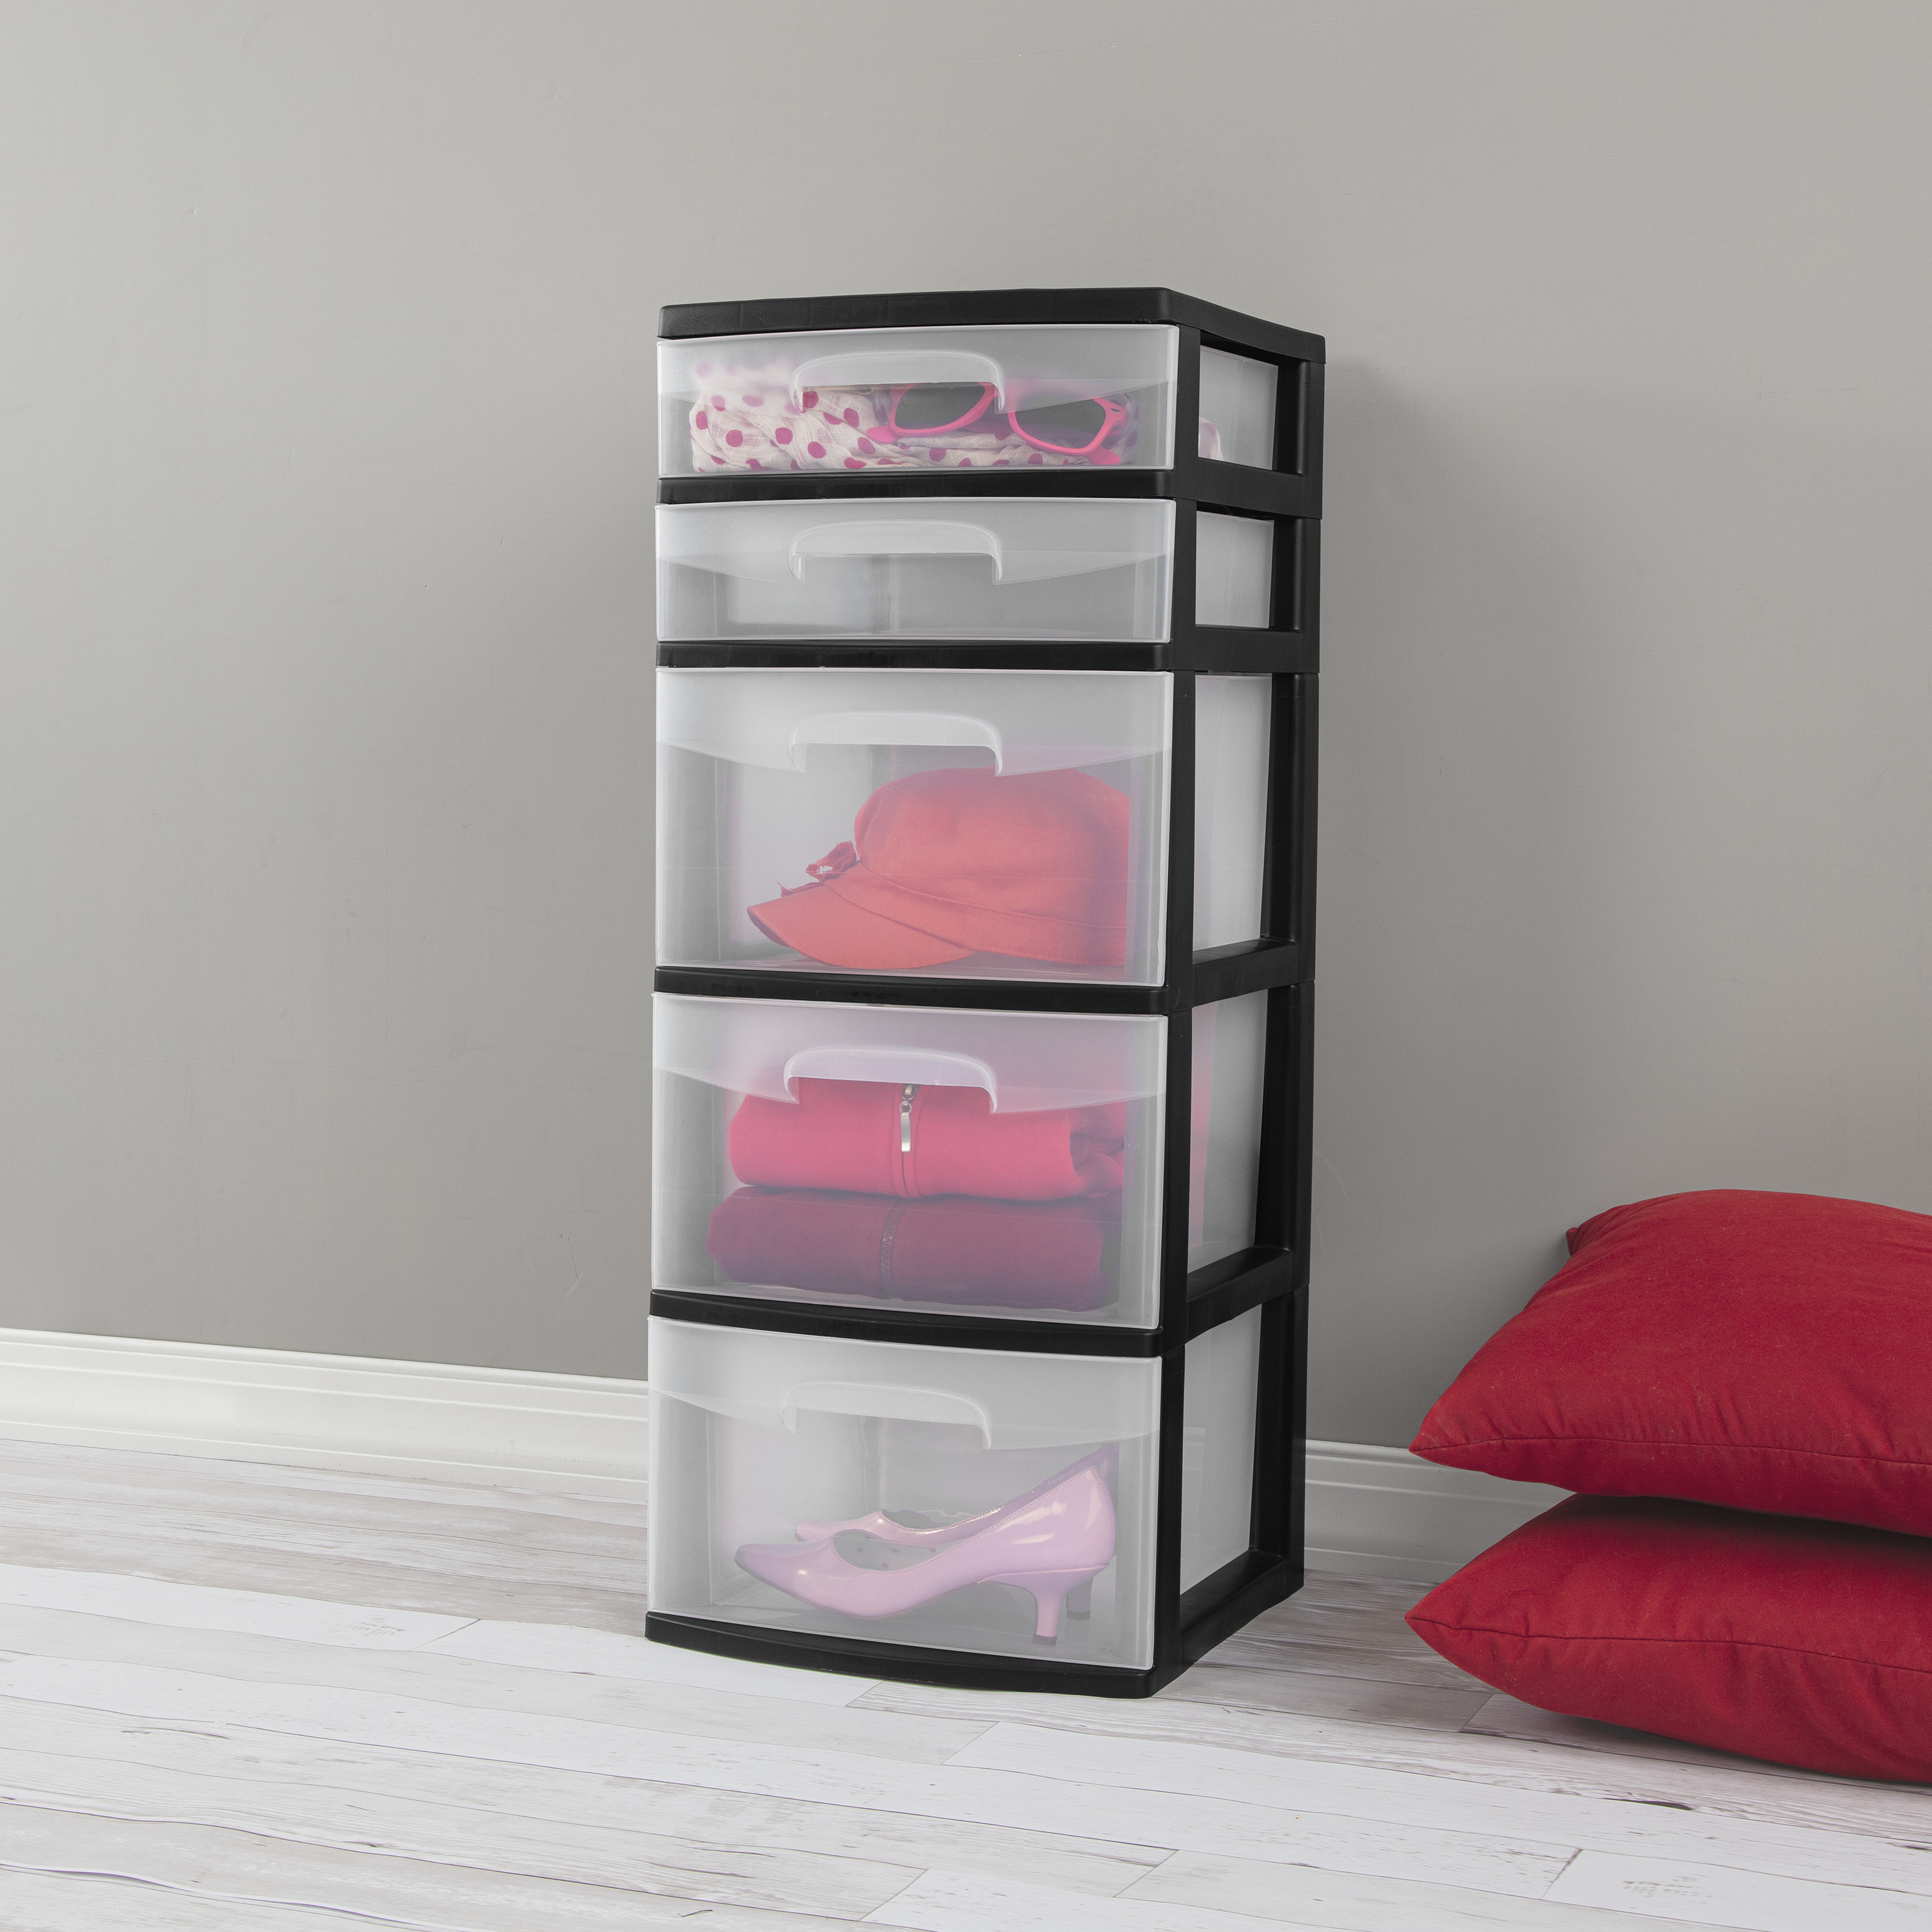 Sterilite Plastic 5-Drawer Tower, Black with Clear Drawers, Adult - image 4 of 6